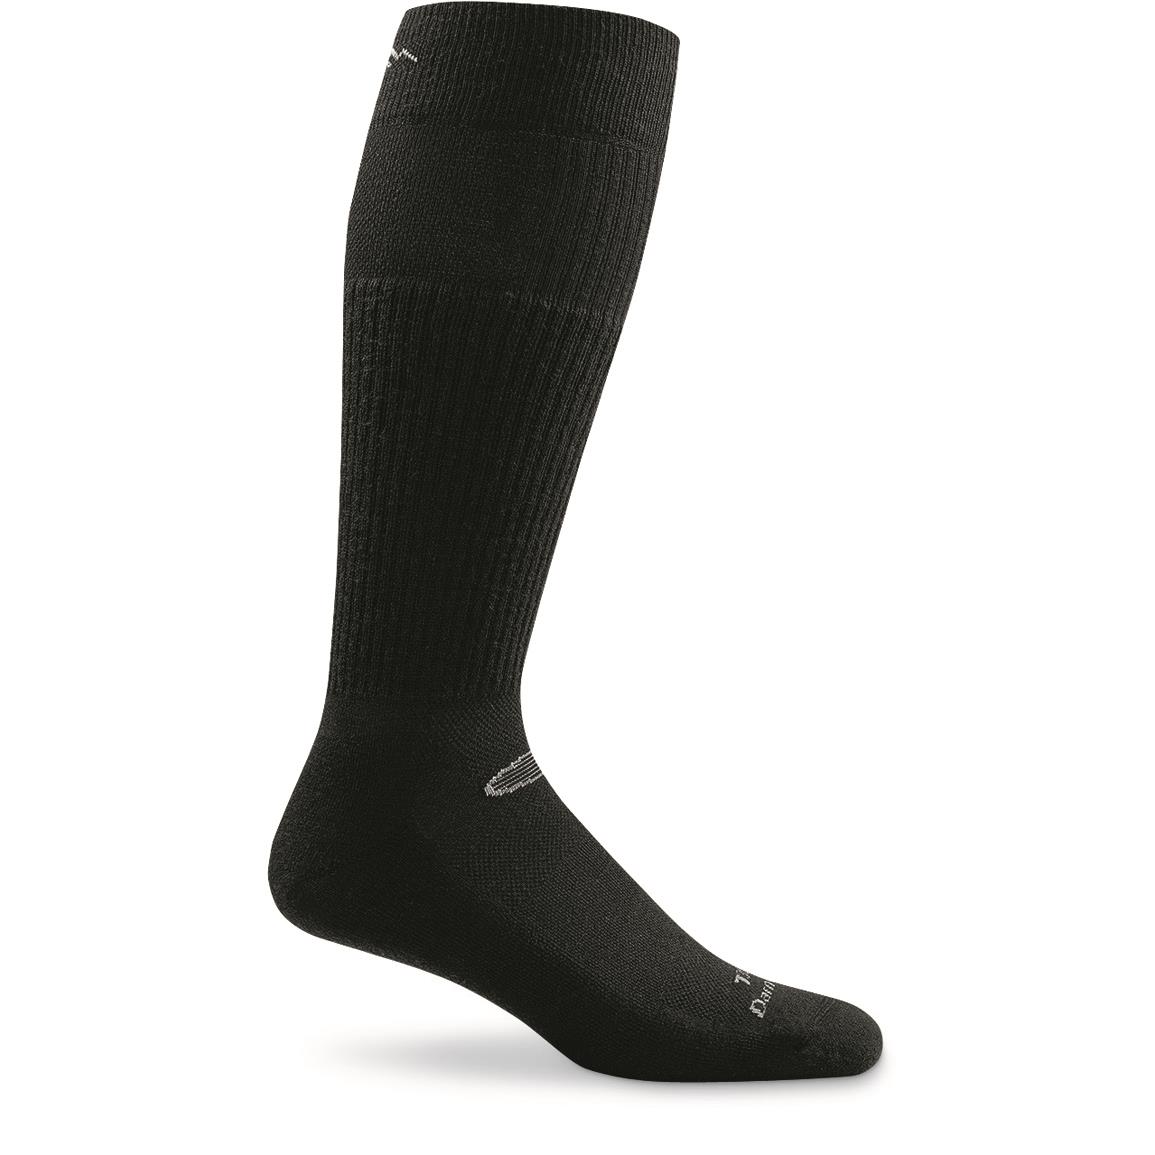 HQ ISSUE Tactical Socks, 10 Pairs - 617029, Socks at Sportsman's Guide